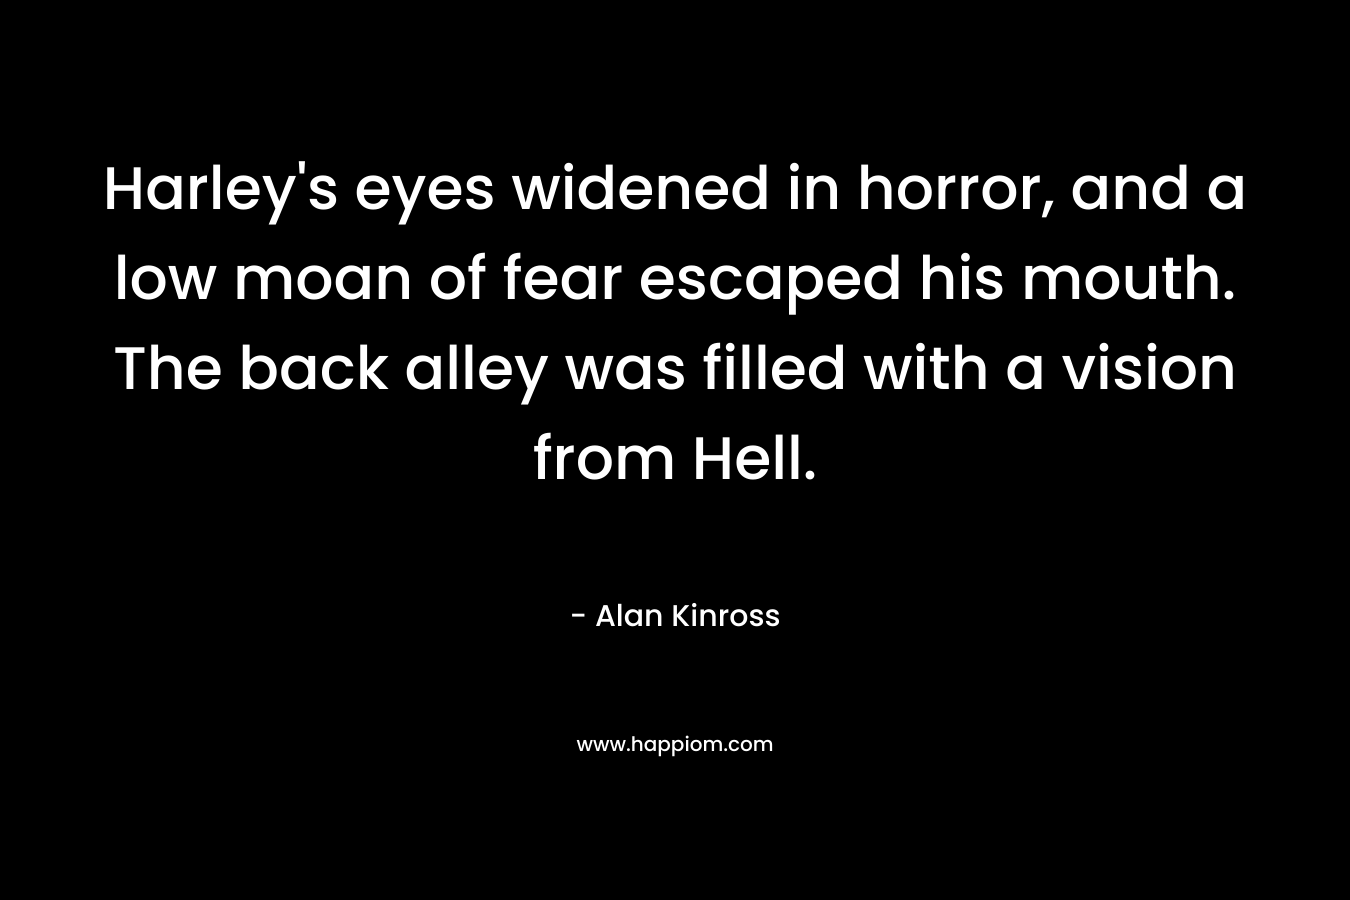 Harley’s eyes widened in horror, and a low moan of fear escaped his mouth. The back alley was filled with a vision from Hell. – Alan Kinross